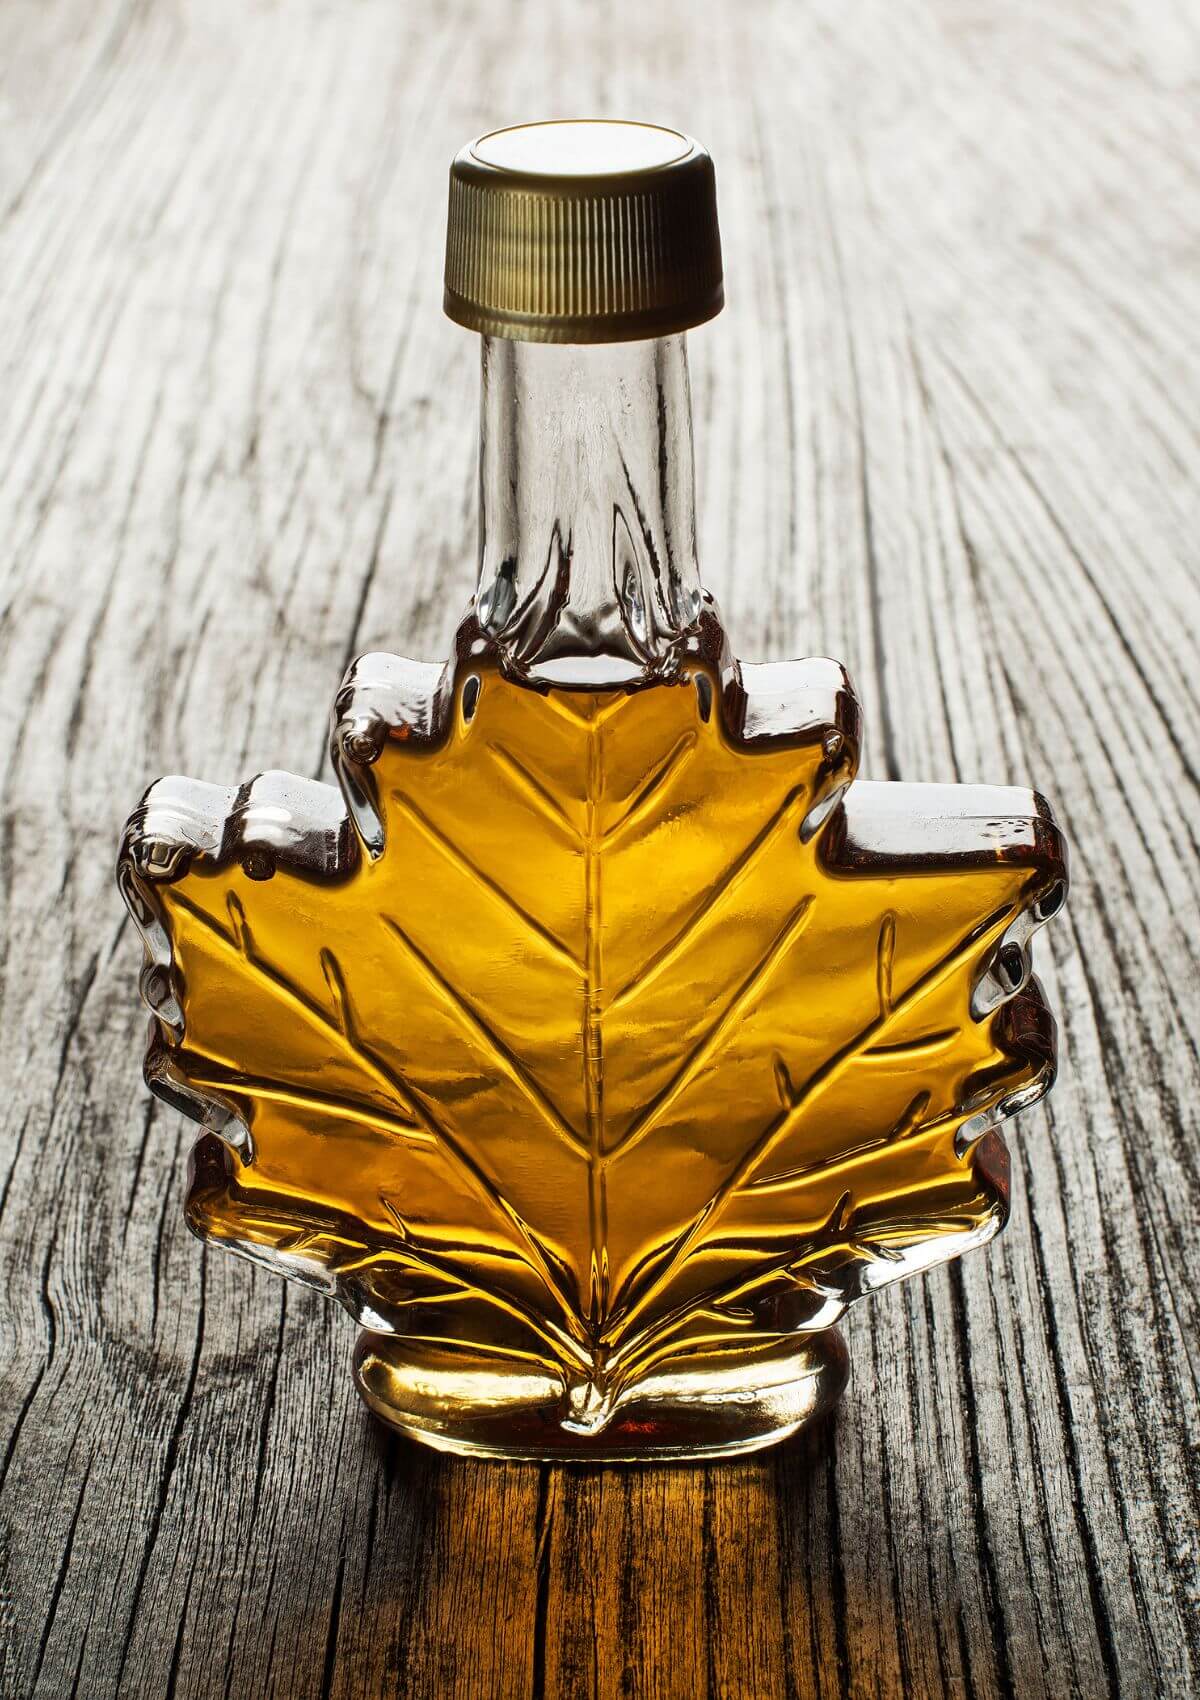 Maple syrup is famous in Canada